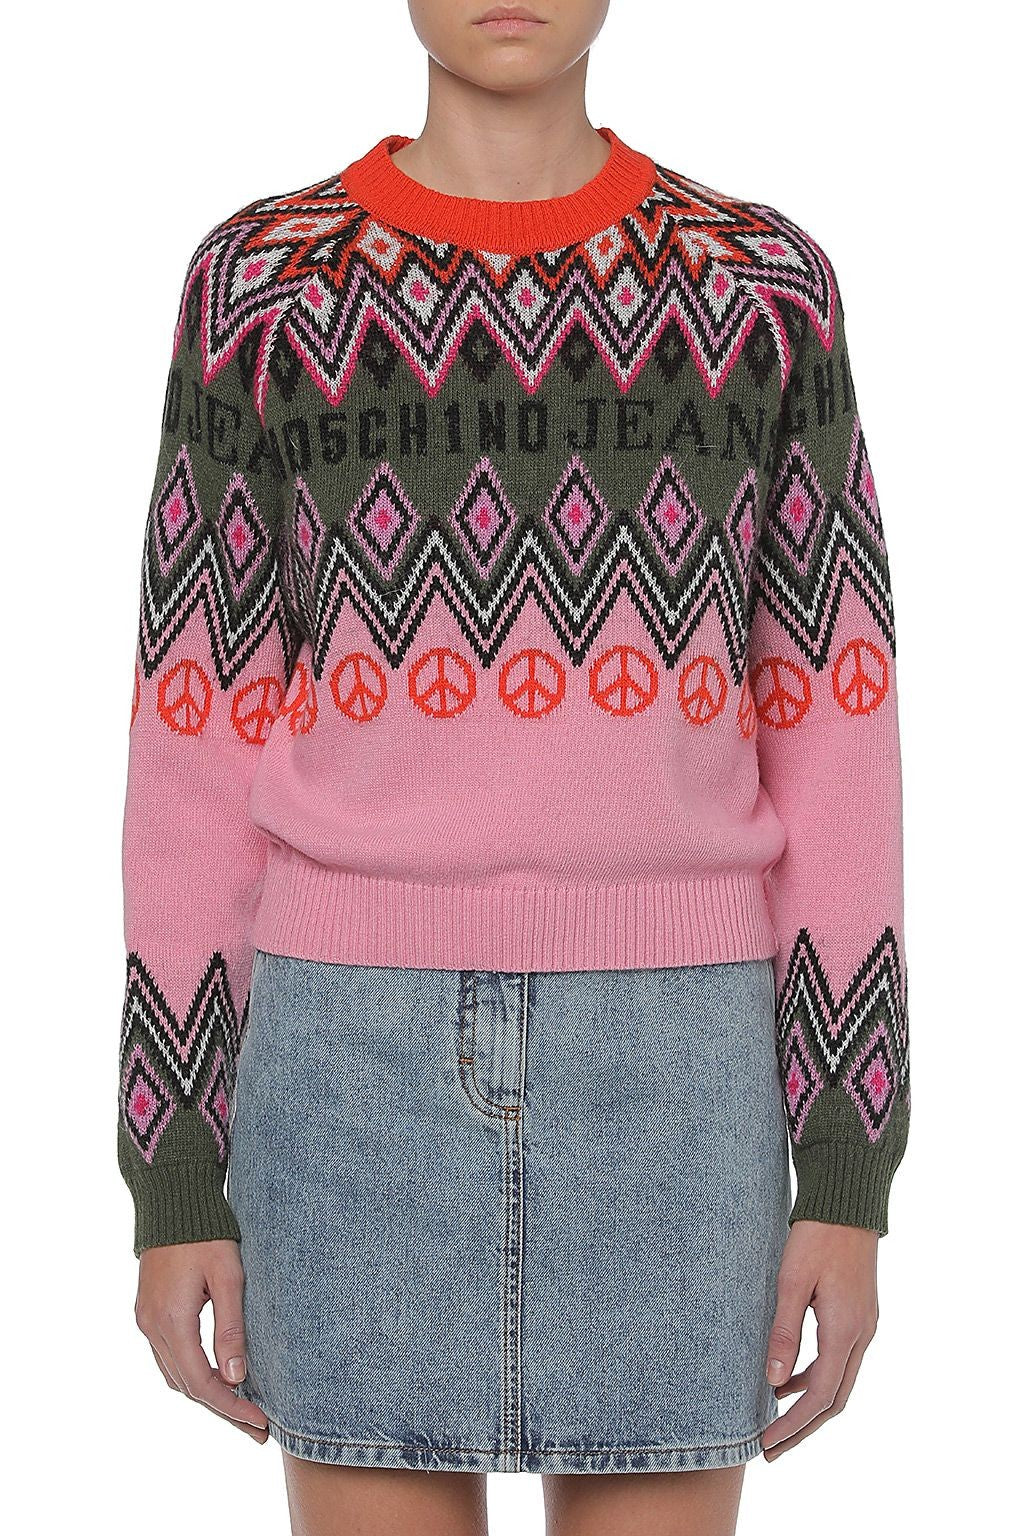 MOSCHINO JEANS GRAPHIC JACQUARD WOOL AND CASHMERE SWEATER